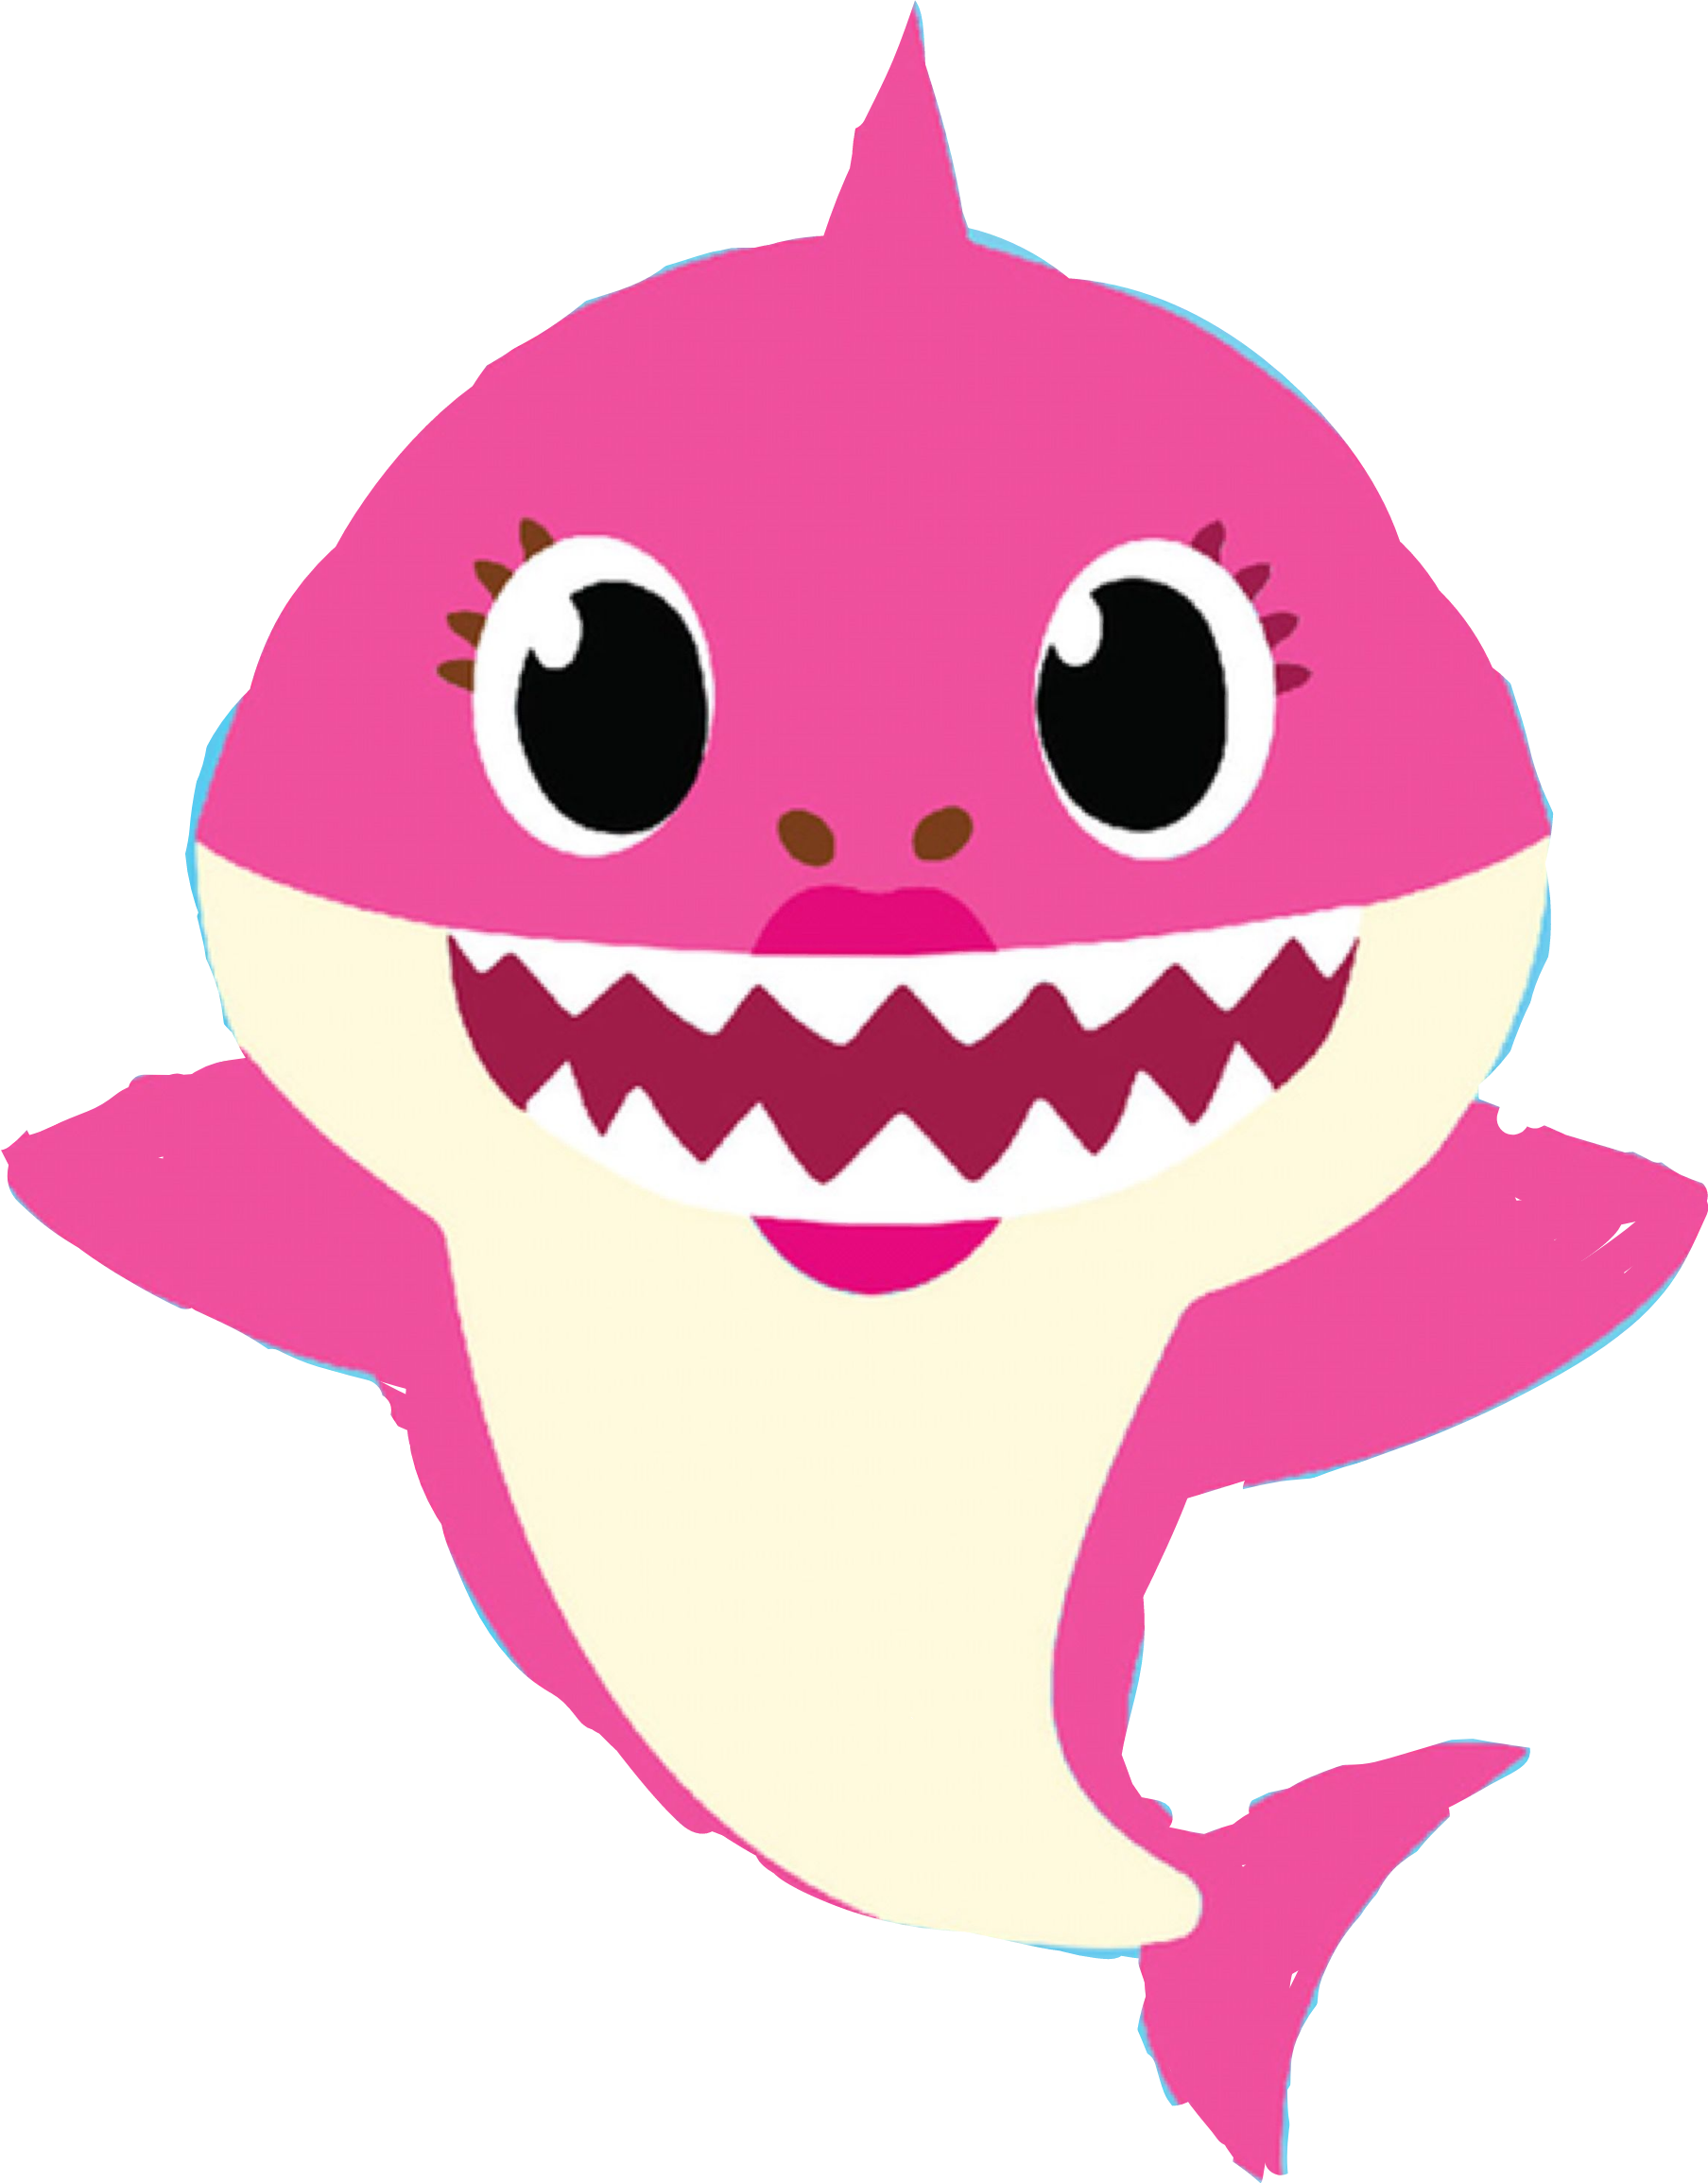 Download The Newest babyshark Stickers on PicsArt.